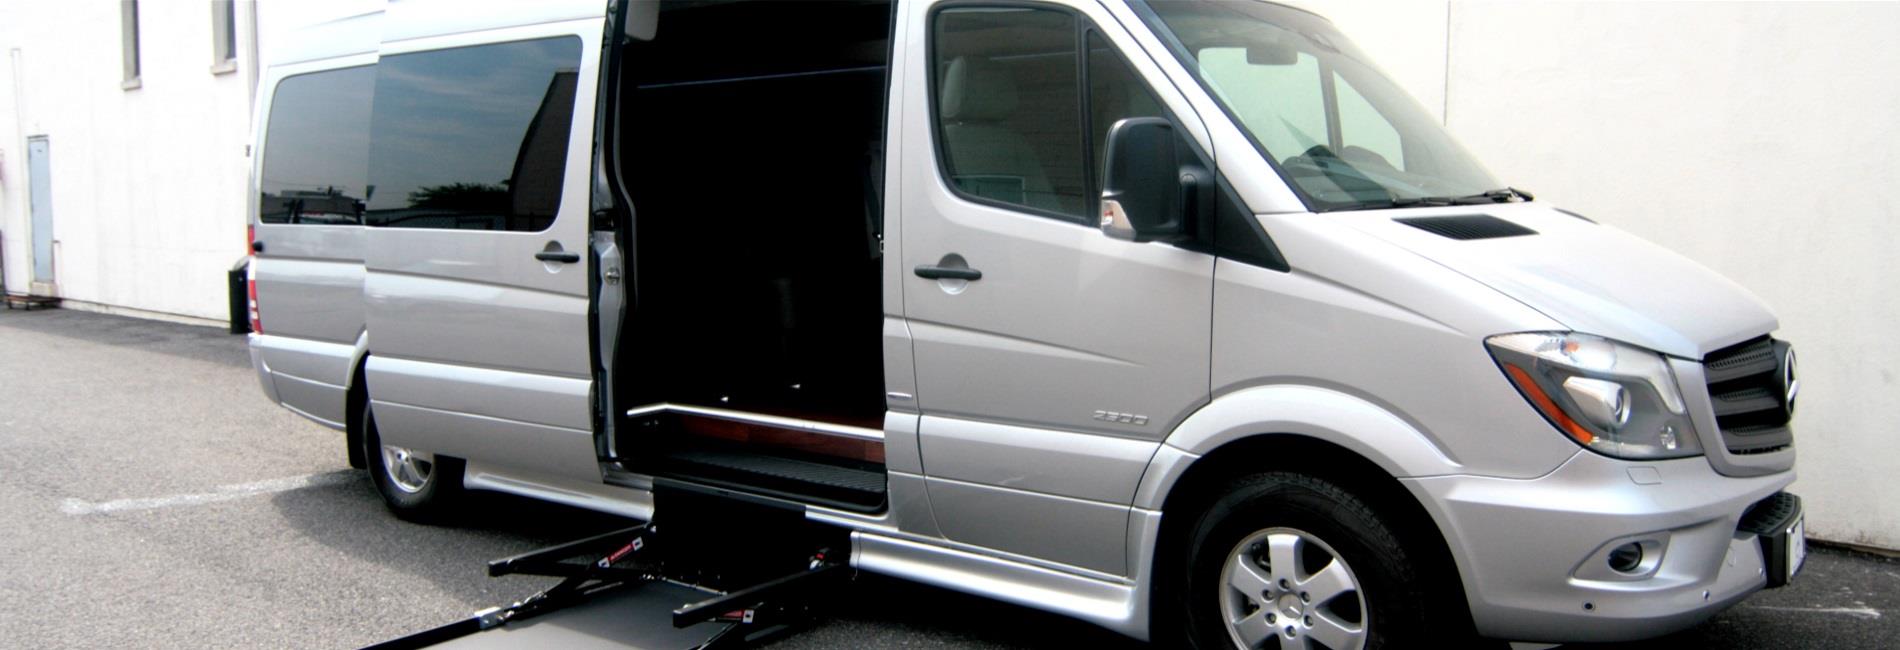 Offering various accommodations, lifts, among other options and mobility solutions.